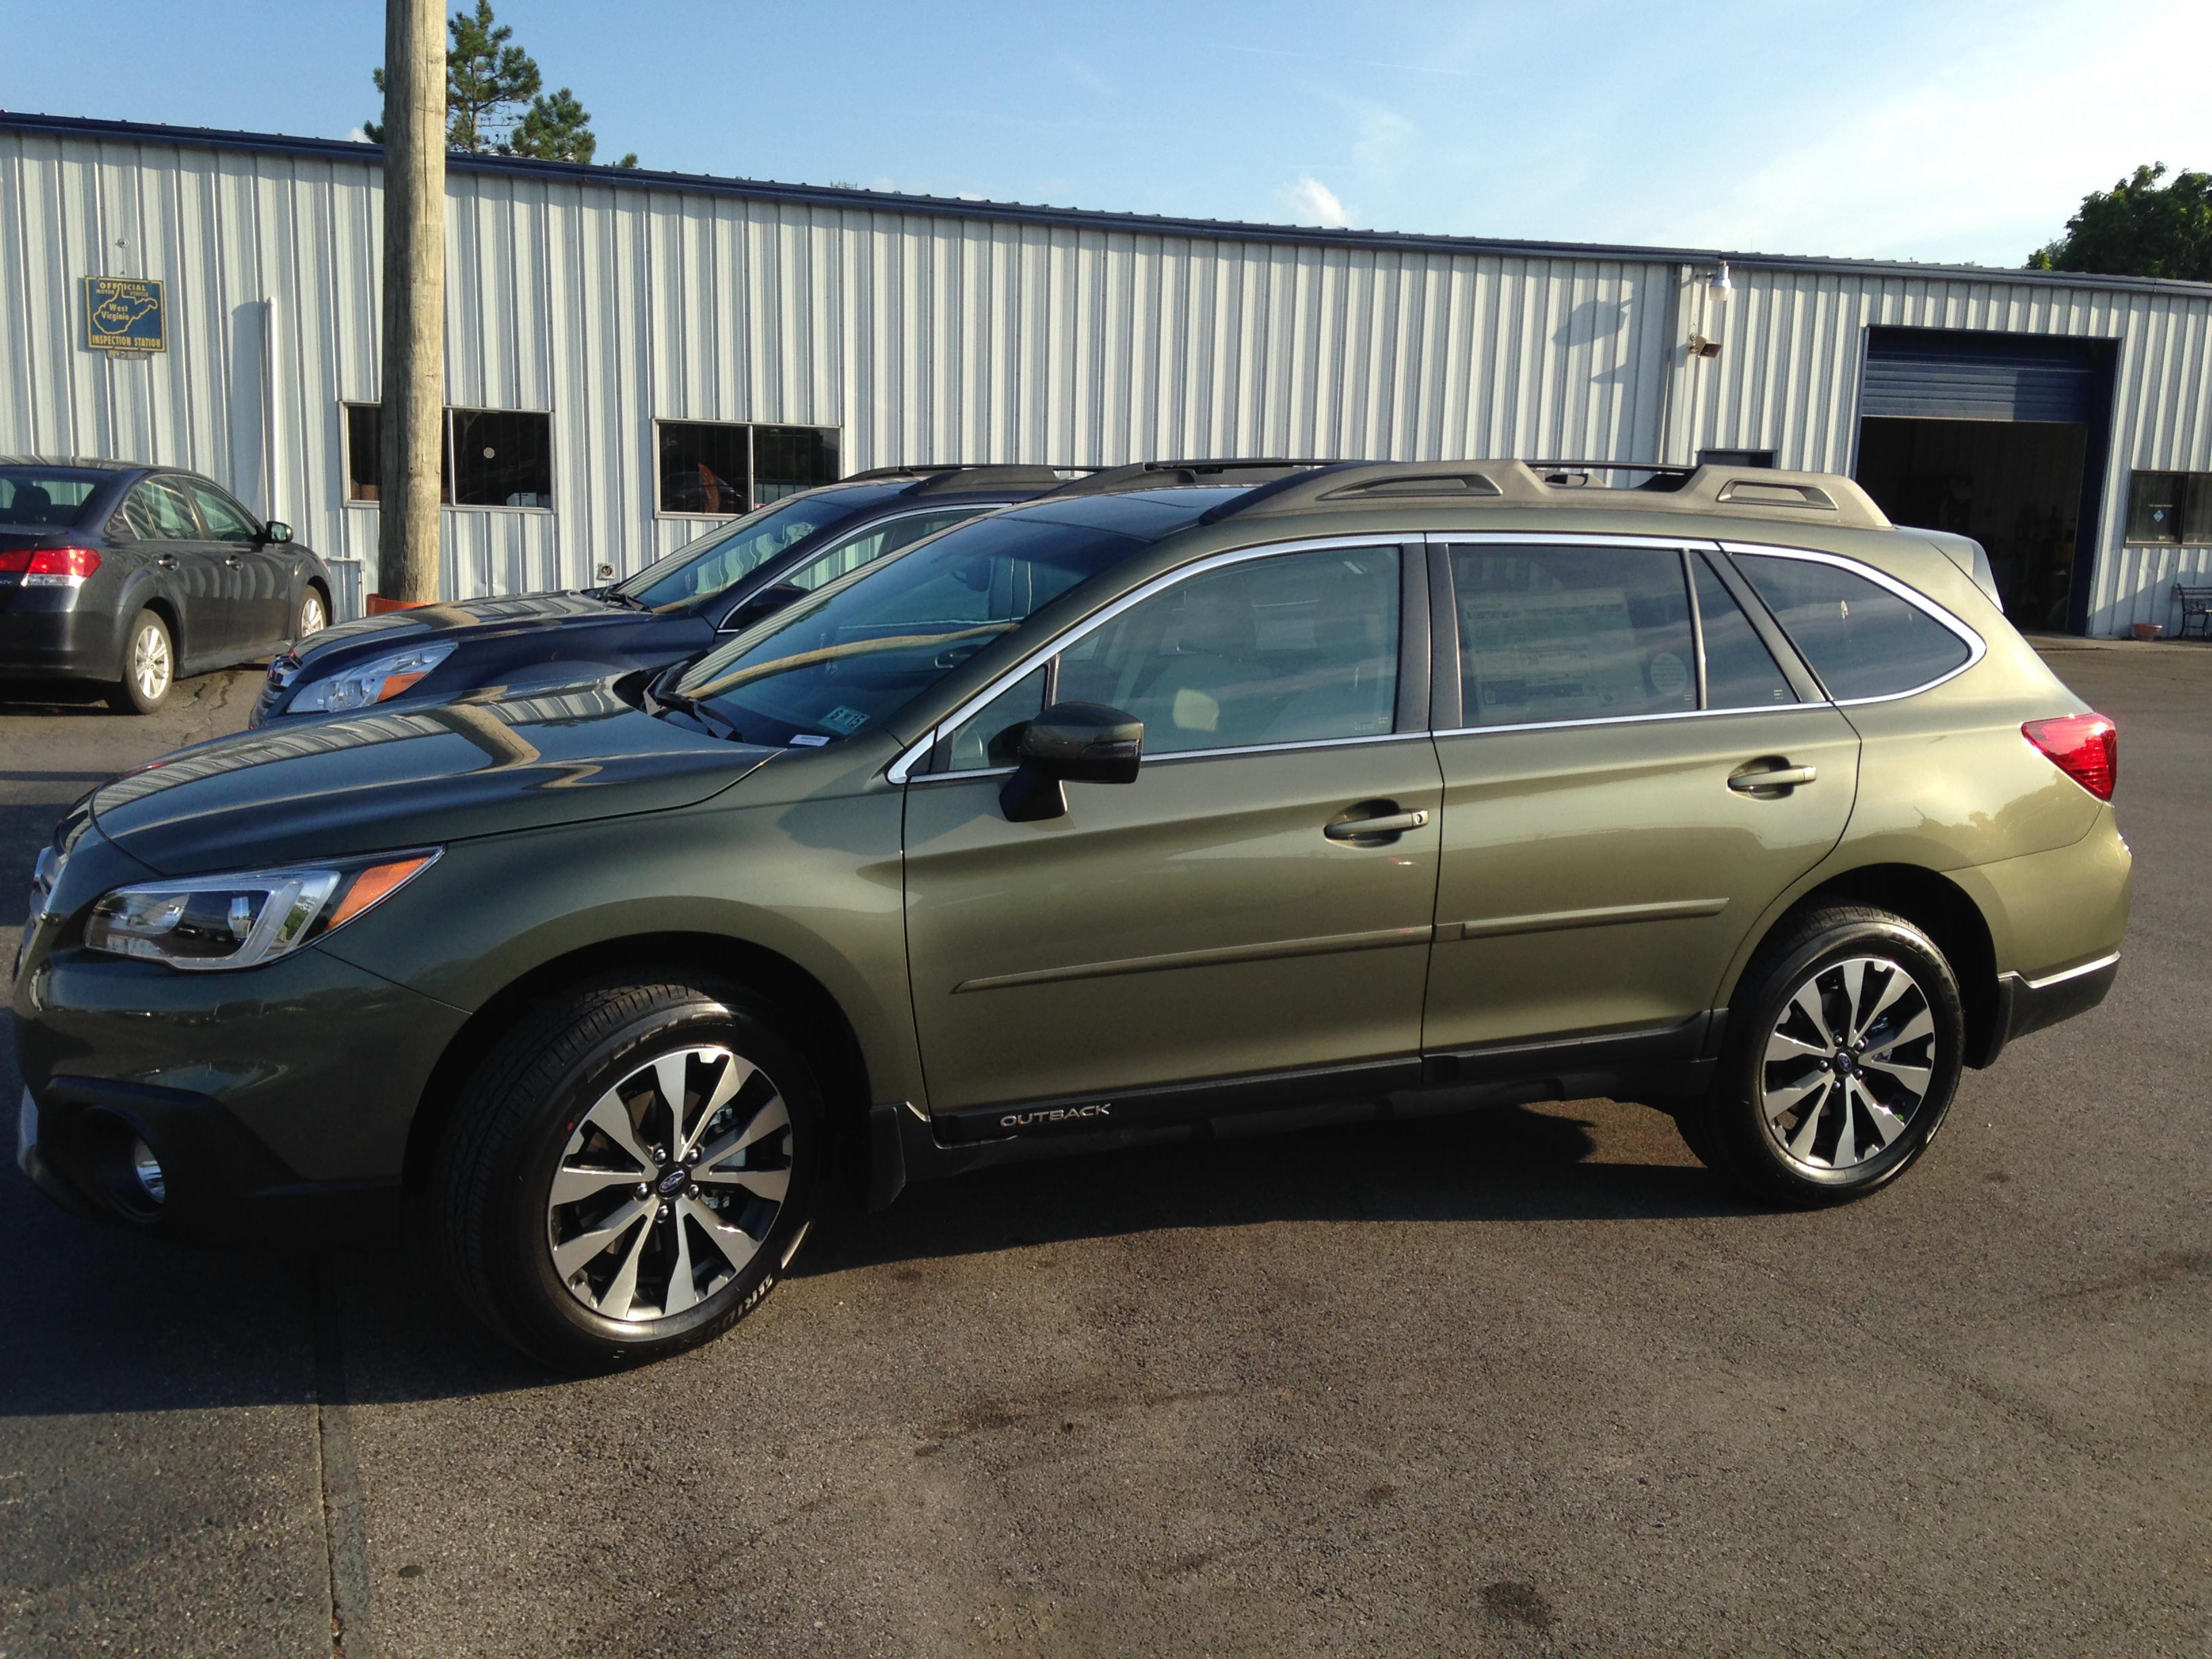 Subaru Outback wagon specifications